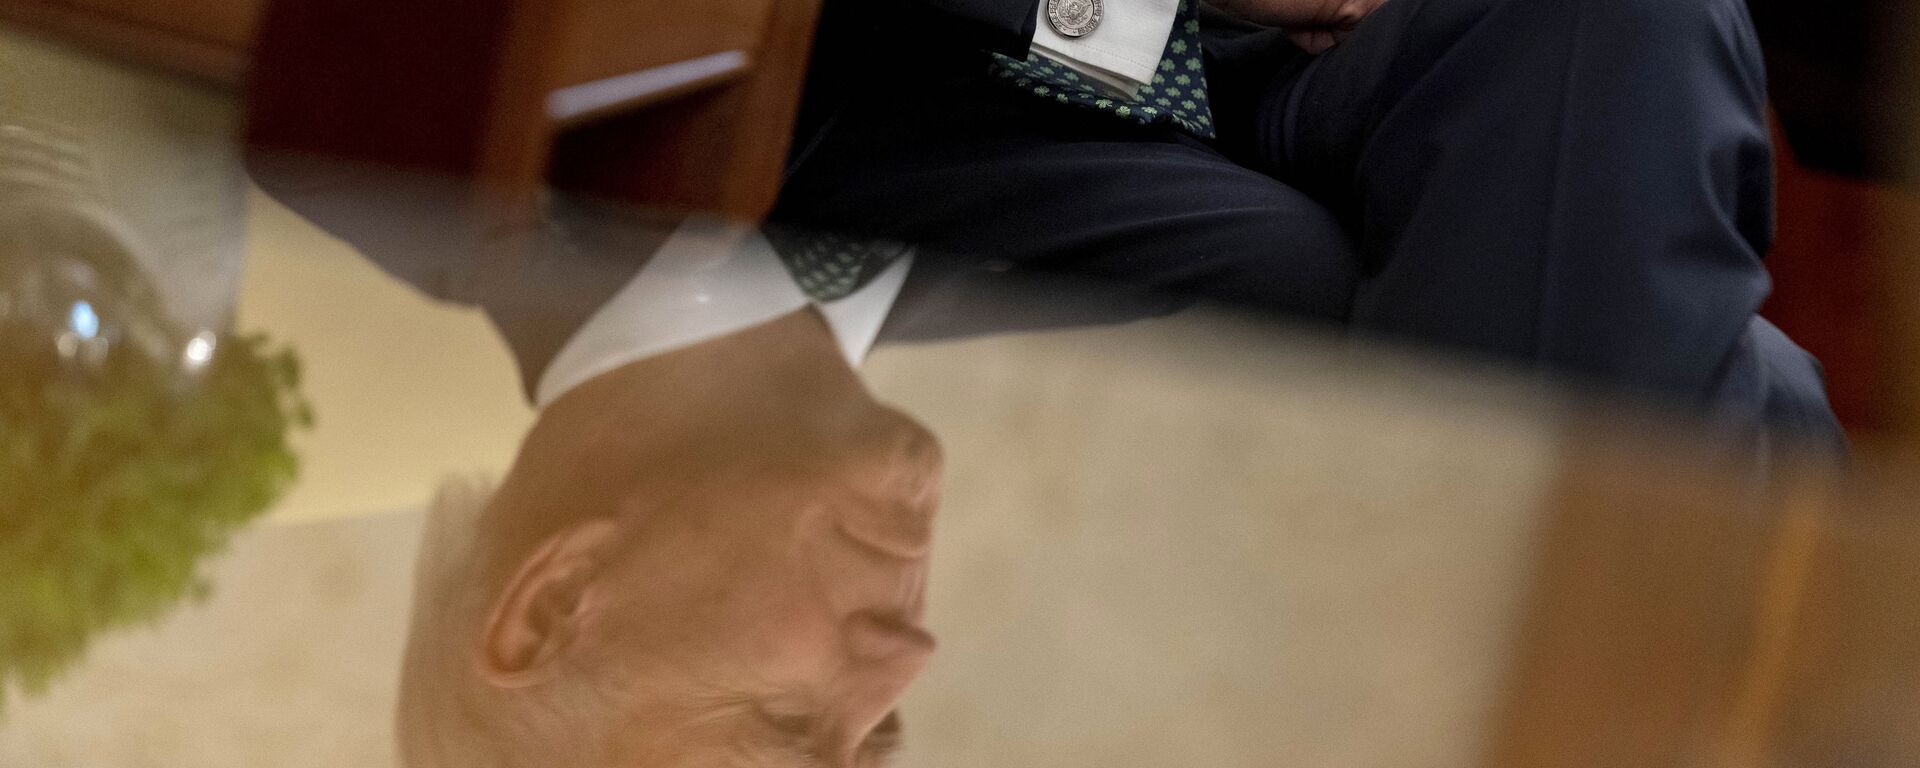 President Joe Biden, seen in reflection, sits next to a bowl of Irish shamrocks, left, as he has a virtual meeting with Ireland's Prime Minister Micheal Martin on St. Patrick's Day, in the Oval Office of the White House, Wednesday, March 17, 2021, in Washington.  - Sputnik International, 1920, 12.02.2022